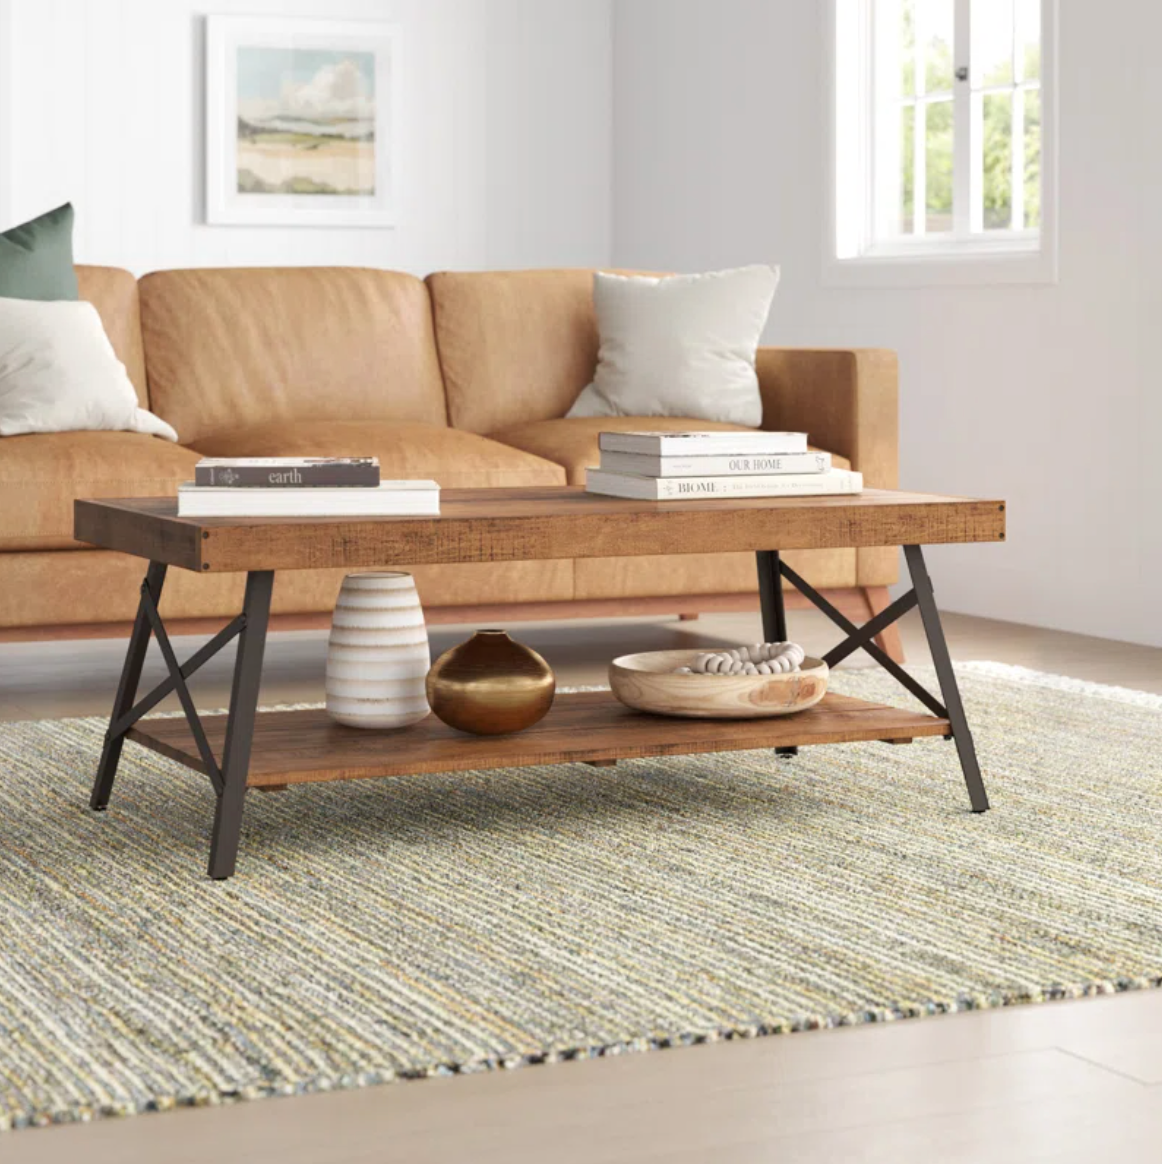 Wayfair 72-hour Clearance Sale - your last chance to score these deals and  closeouts under $50 